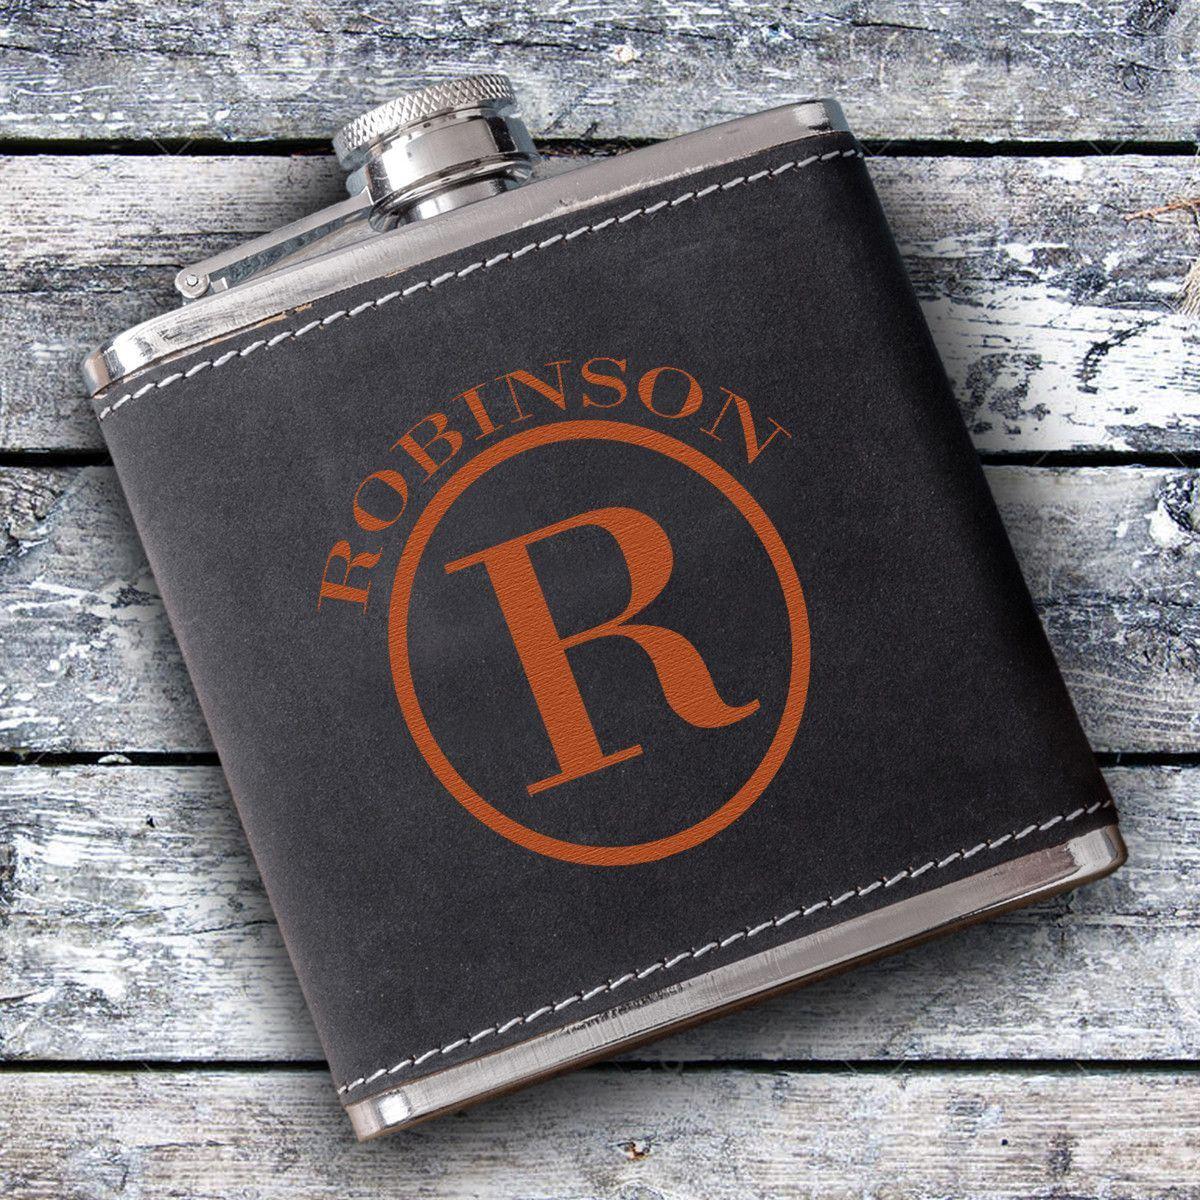 Personalized Silverton Monogrammed 6 oz. Suede Flask